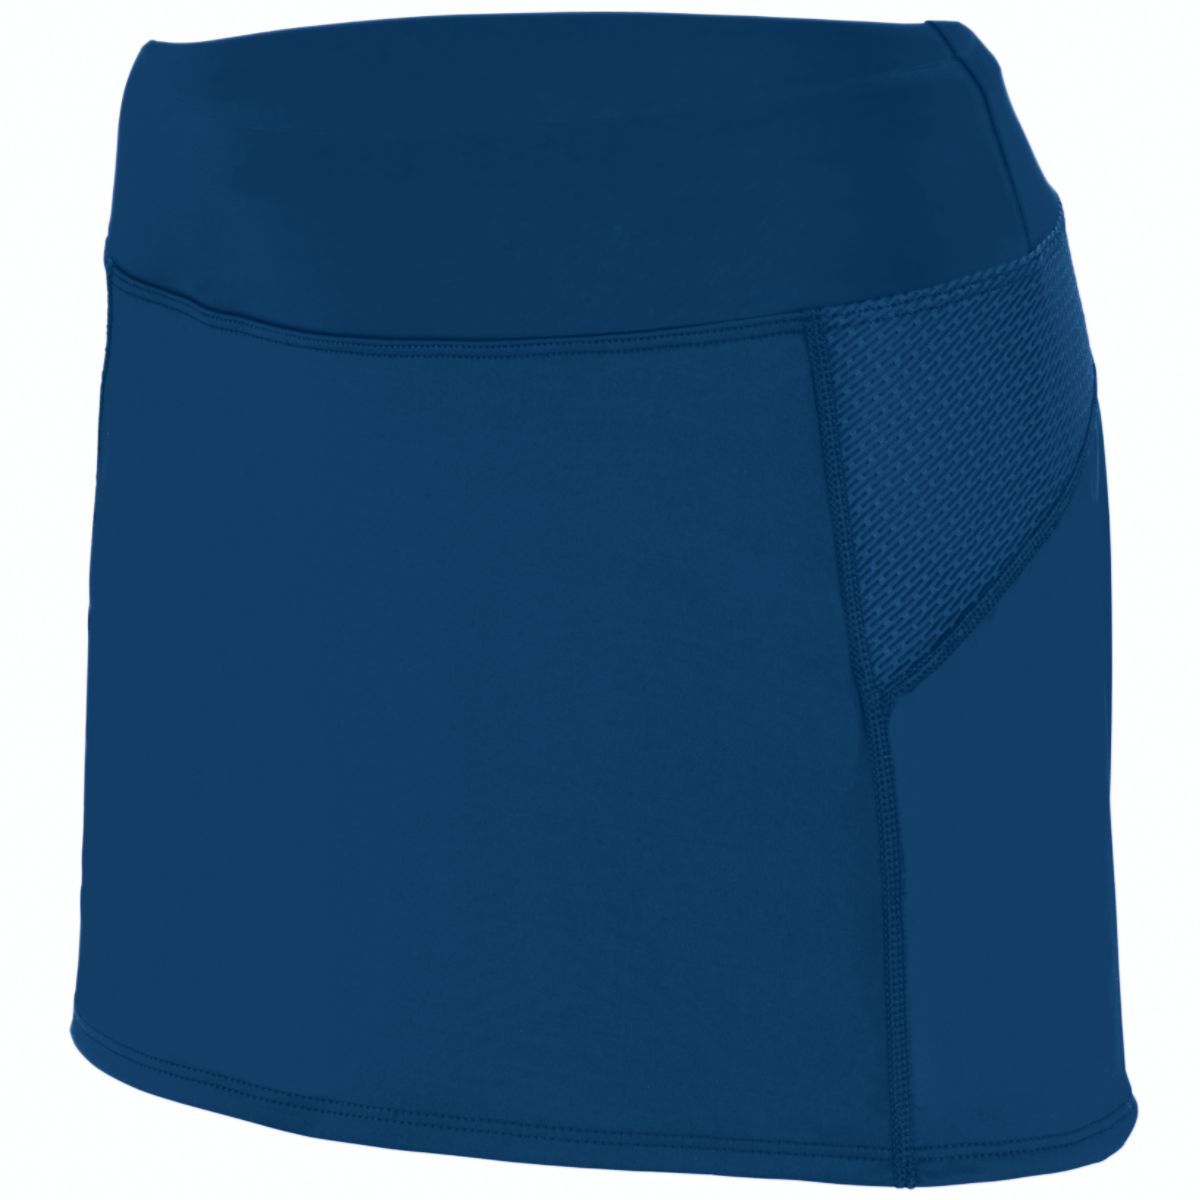 Augusta Sportswear Ladies Femfit Skort in Navy/Graphite  -Part of the Ladies, Augusta-Products product lines at KanaleyCreations.com